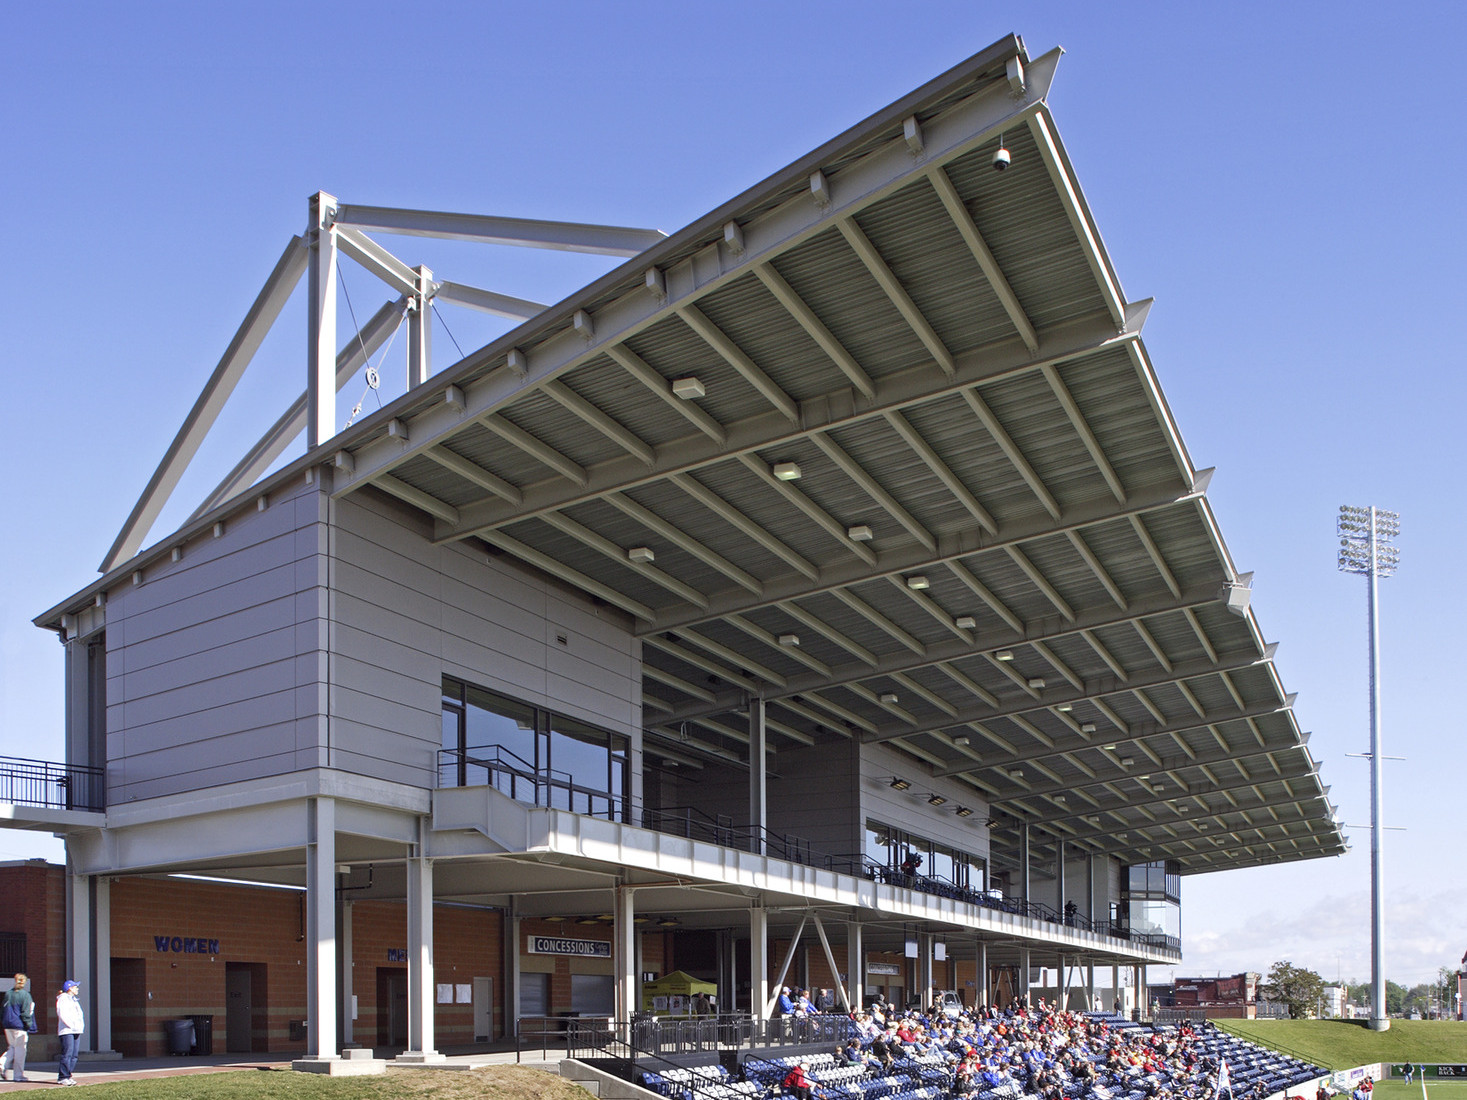 Canopy extends from roof of elevated grey panel box seating above bleachers. Below, brick building with concession stand